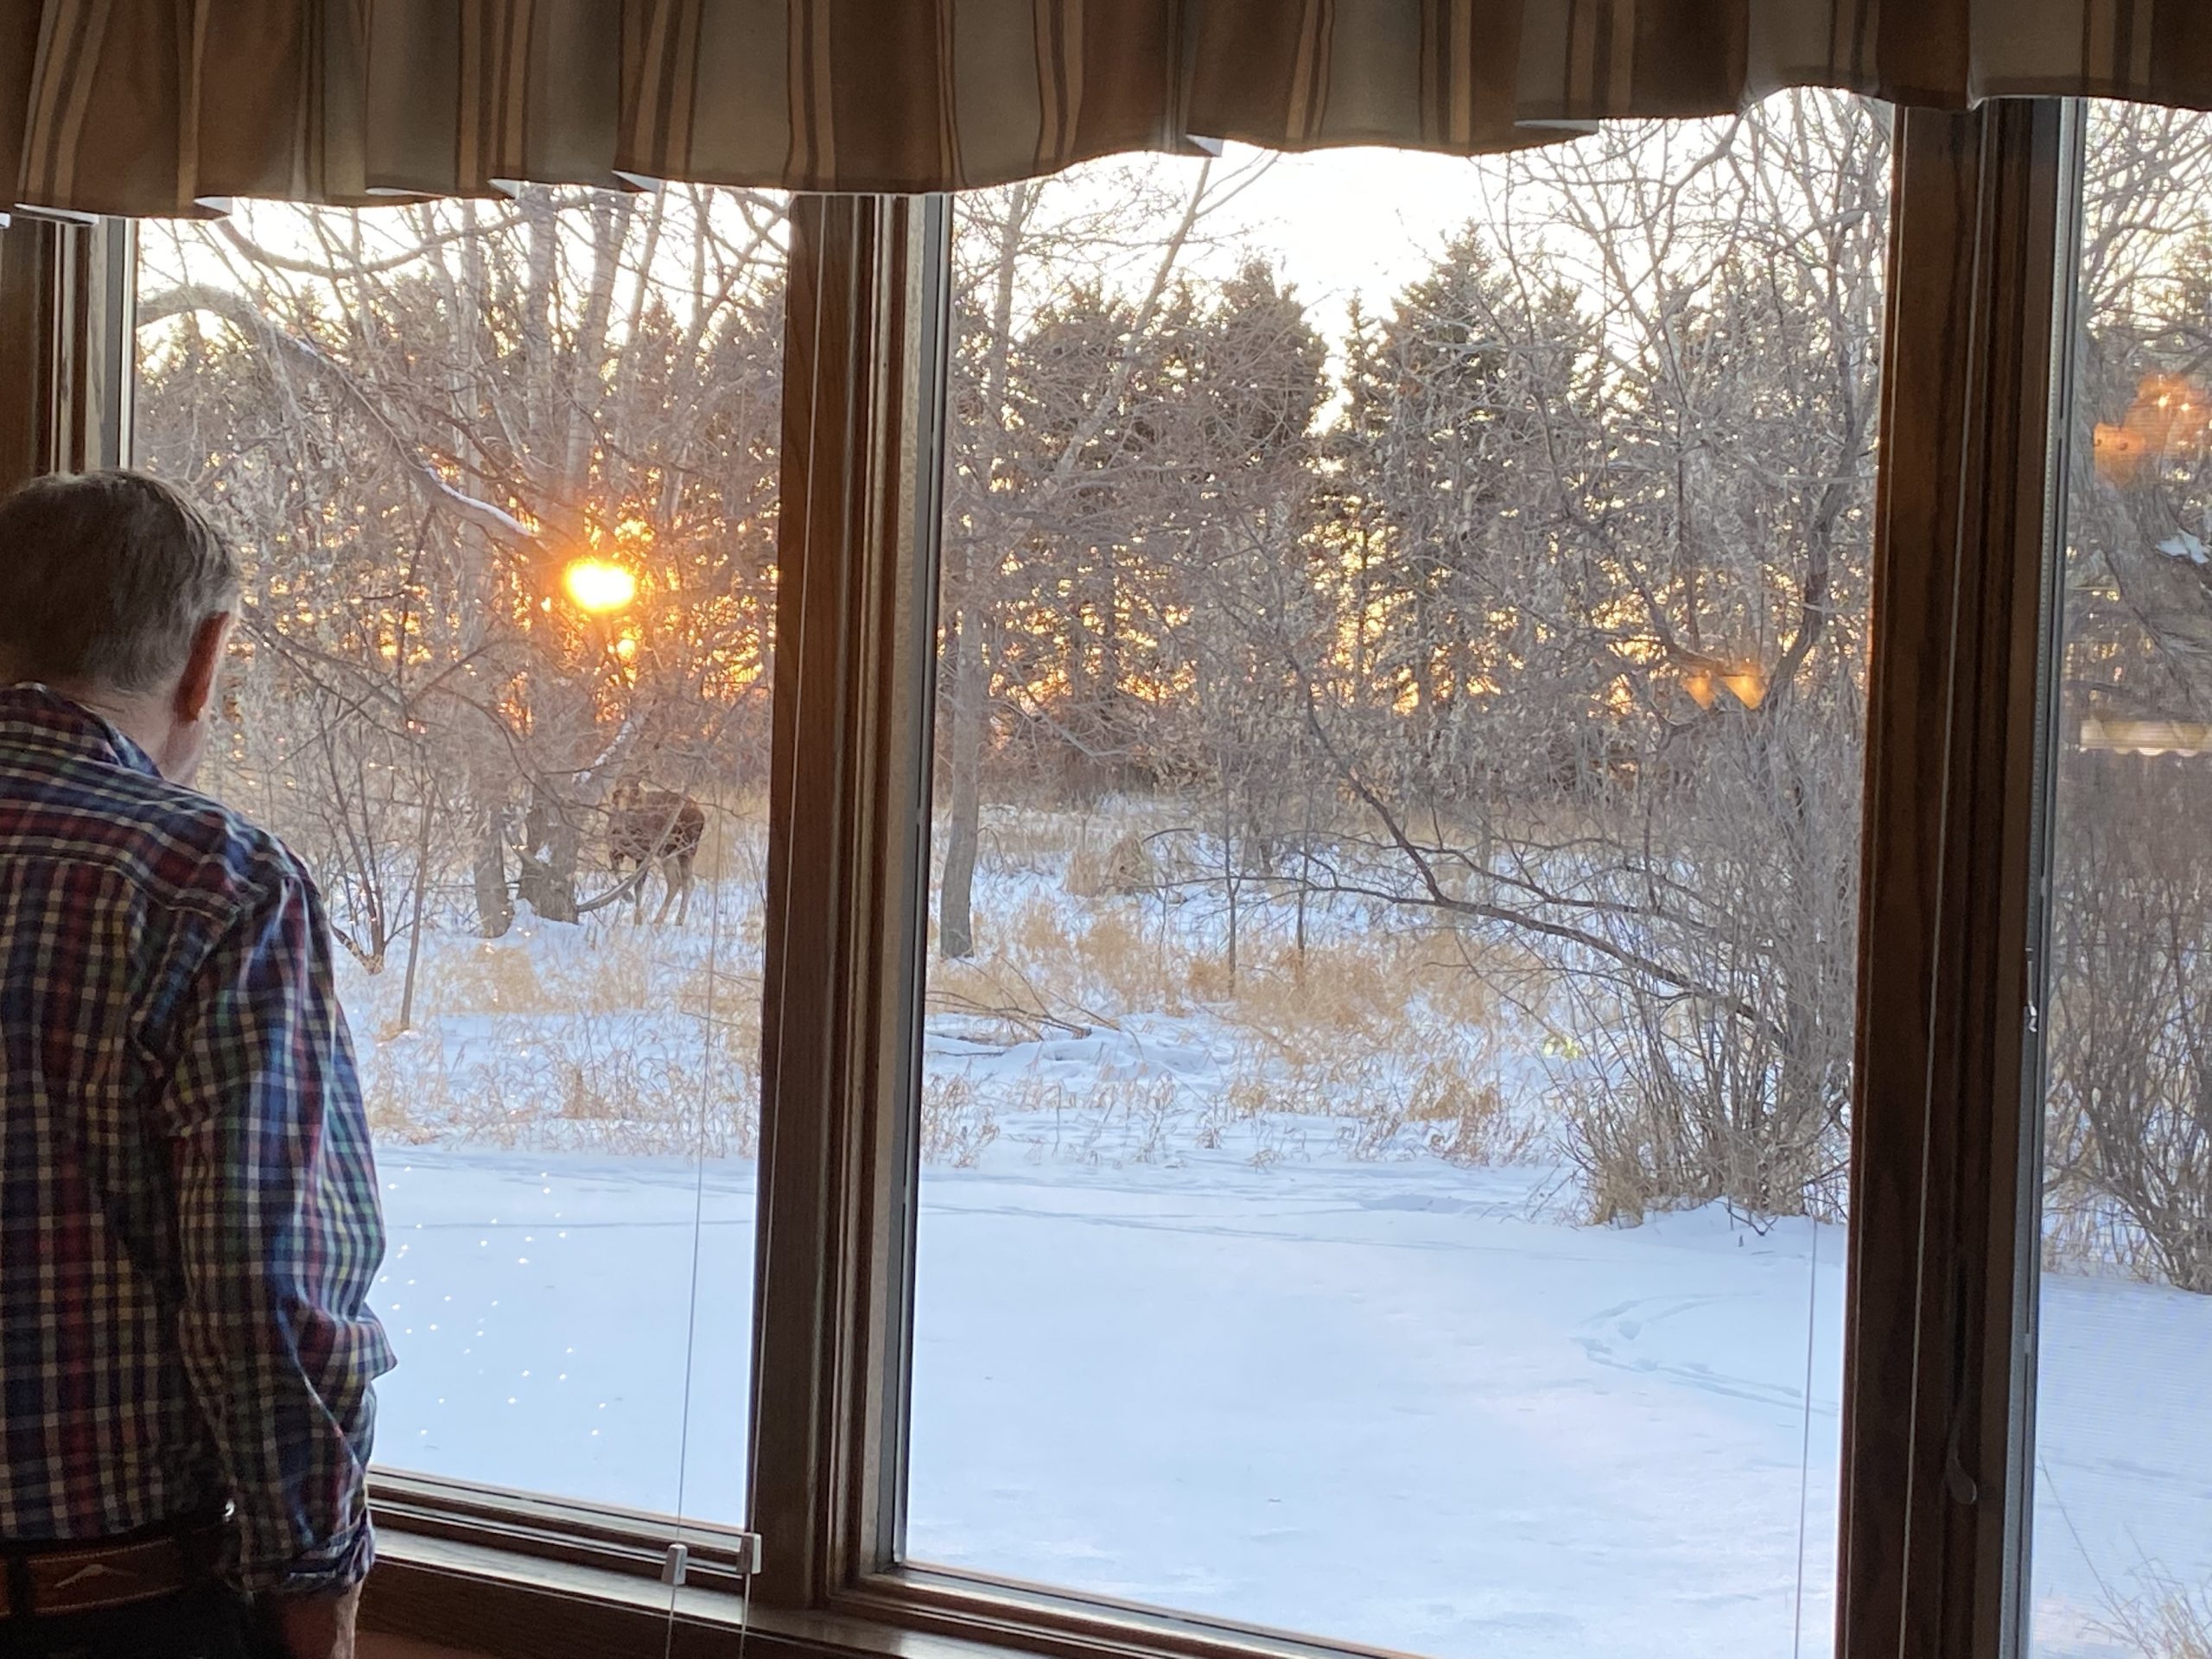 Dad watching moose in the back yard